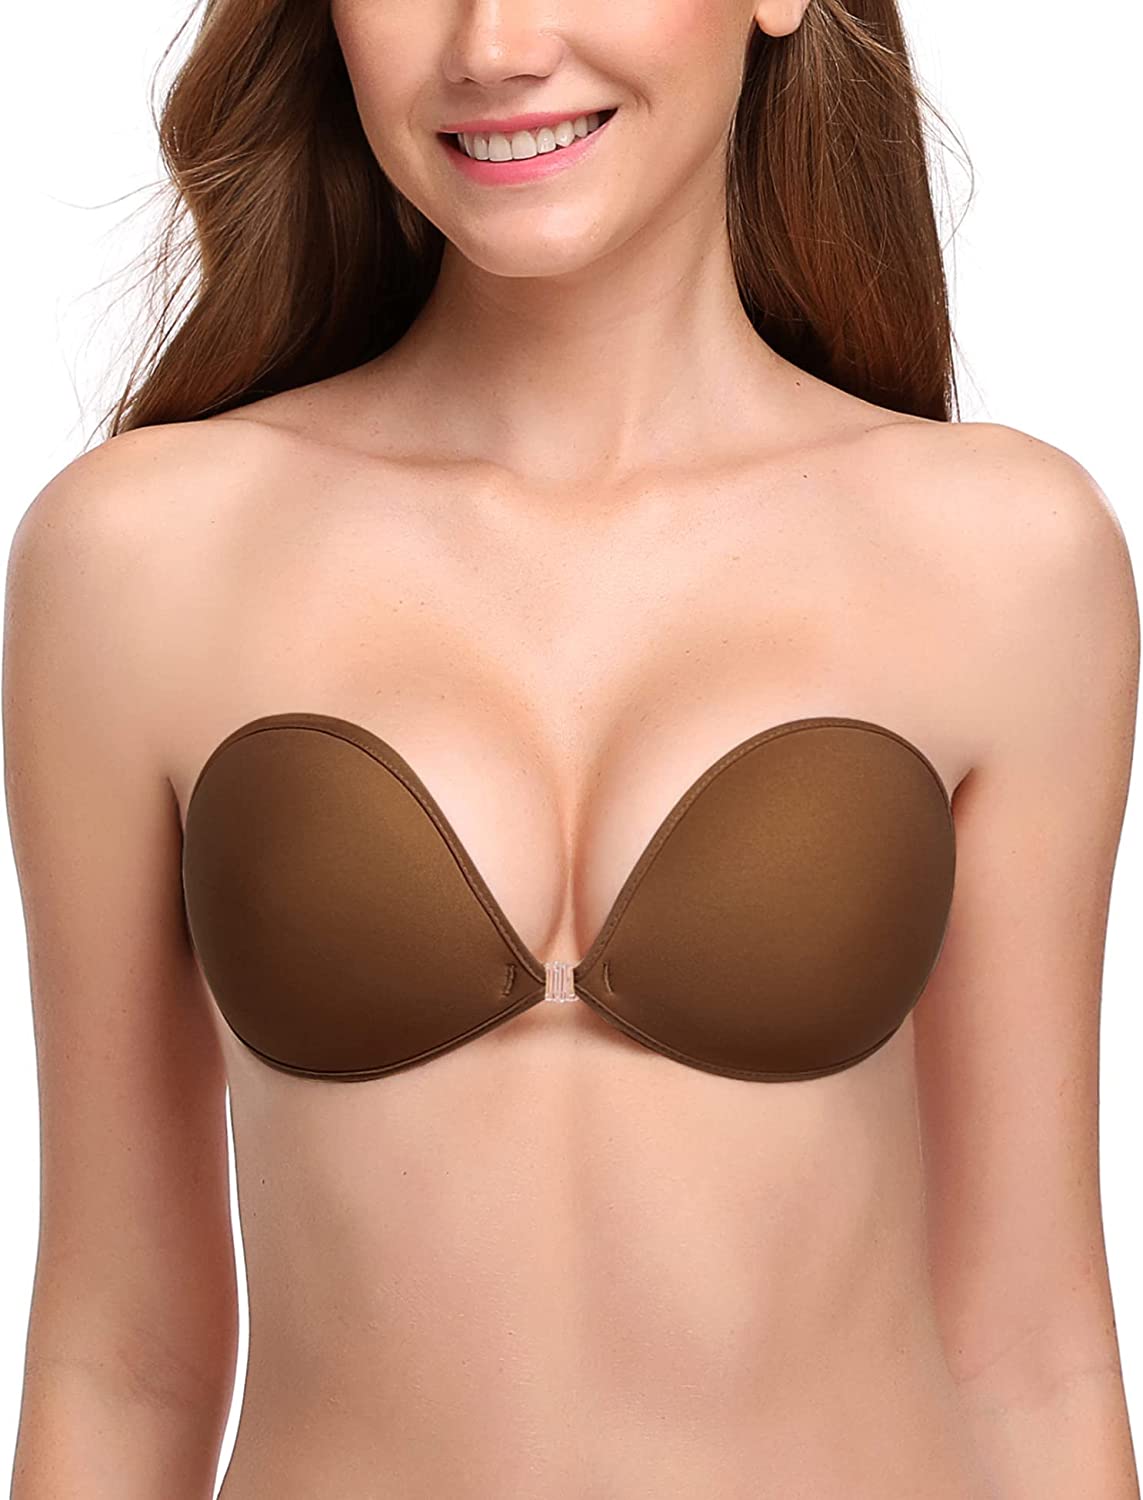 Women's Adhesive Bra Reusable Strapless Self Silicone Push-up Invisible  Sticky Bras for Backless Dress